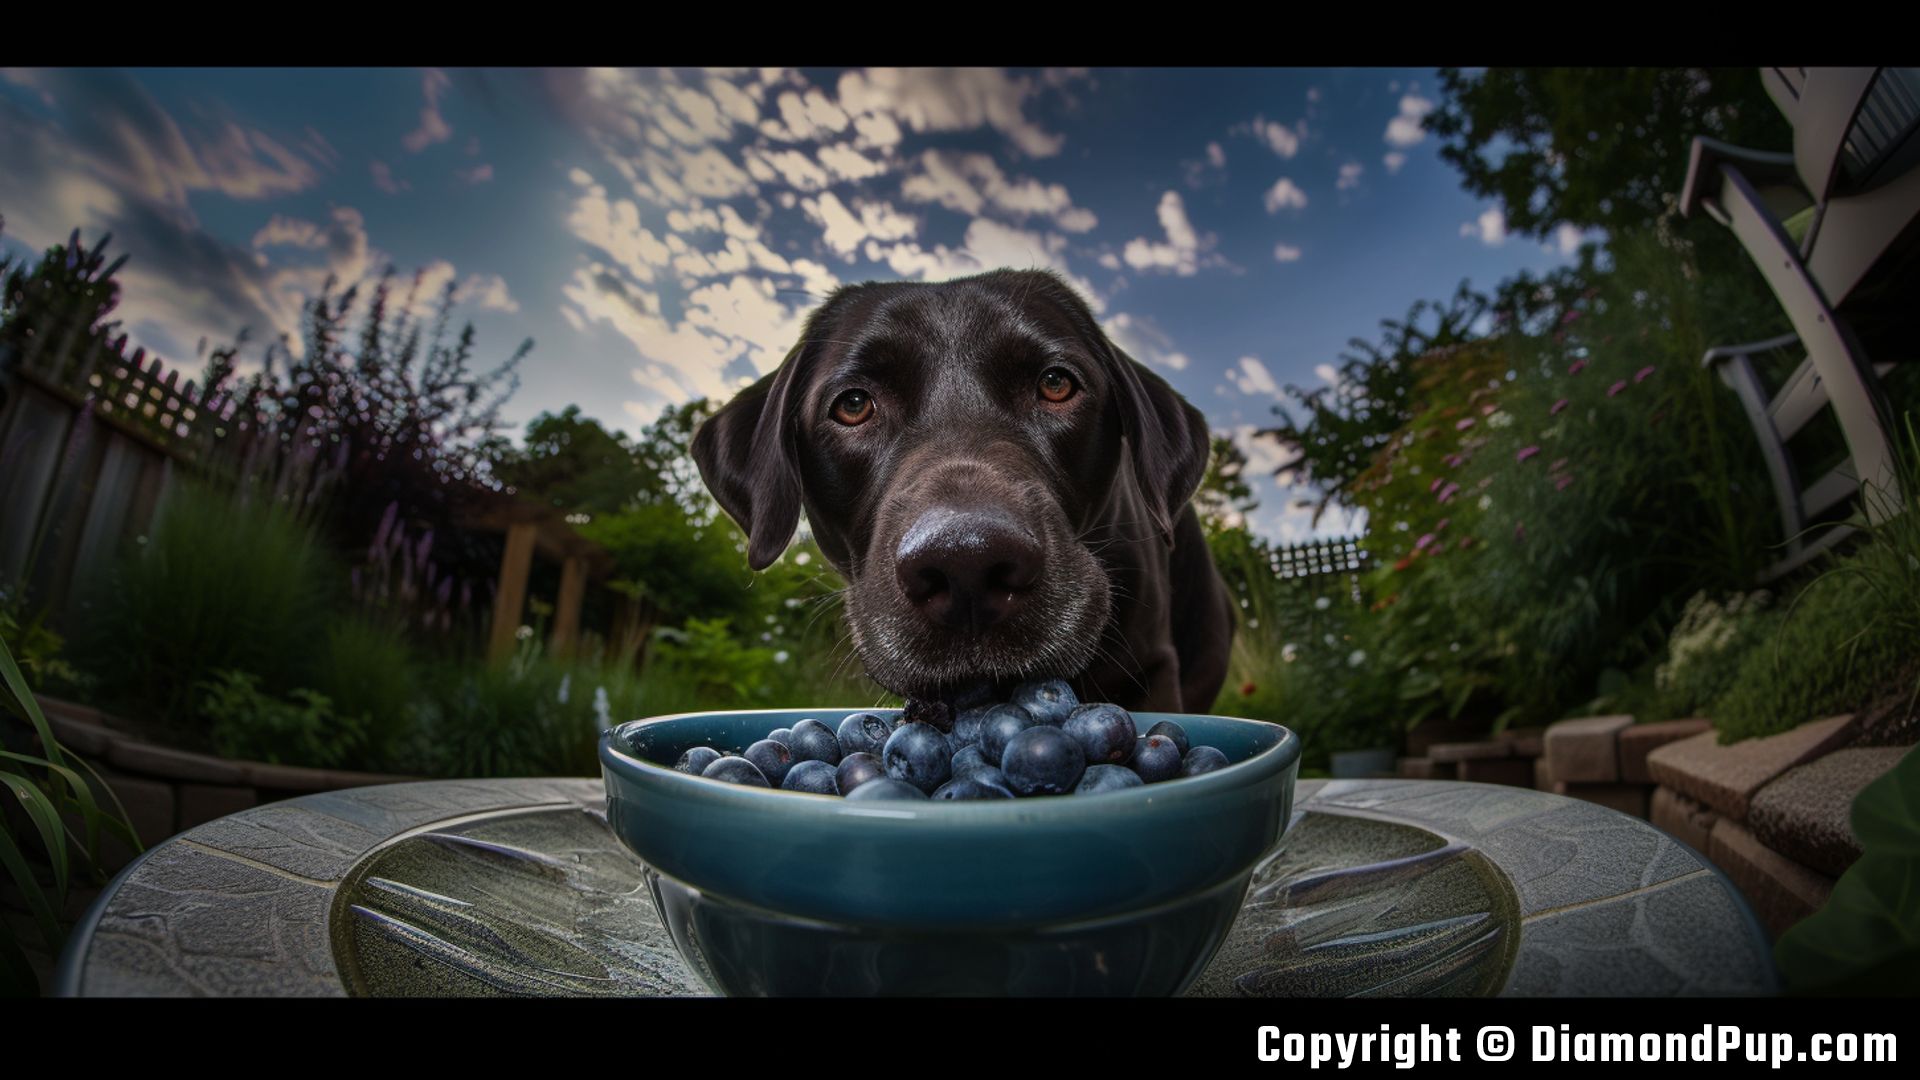 Image of Labrador Snacking on Blueberries